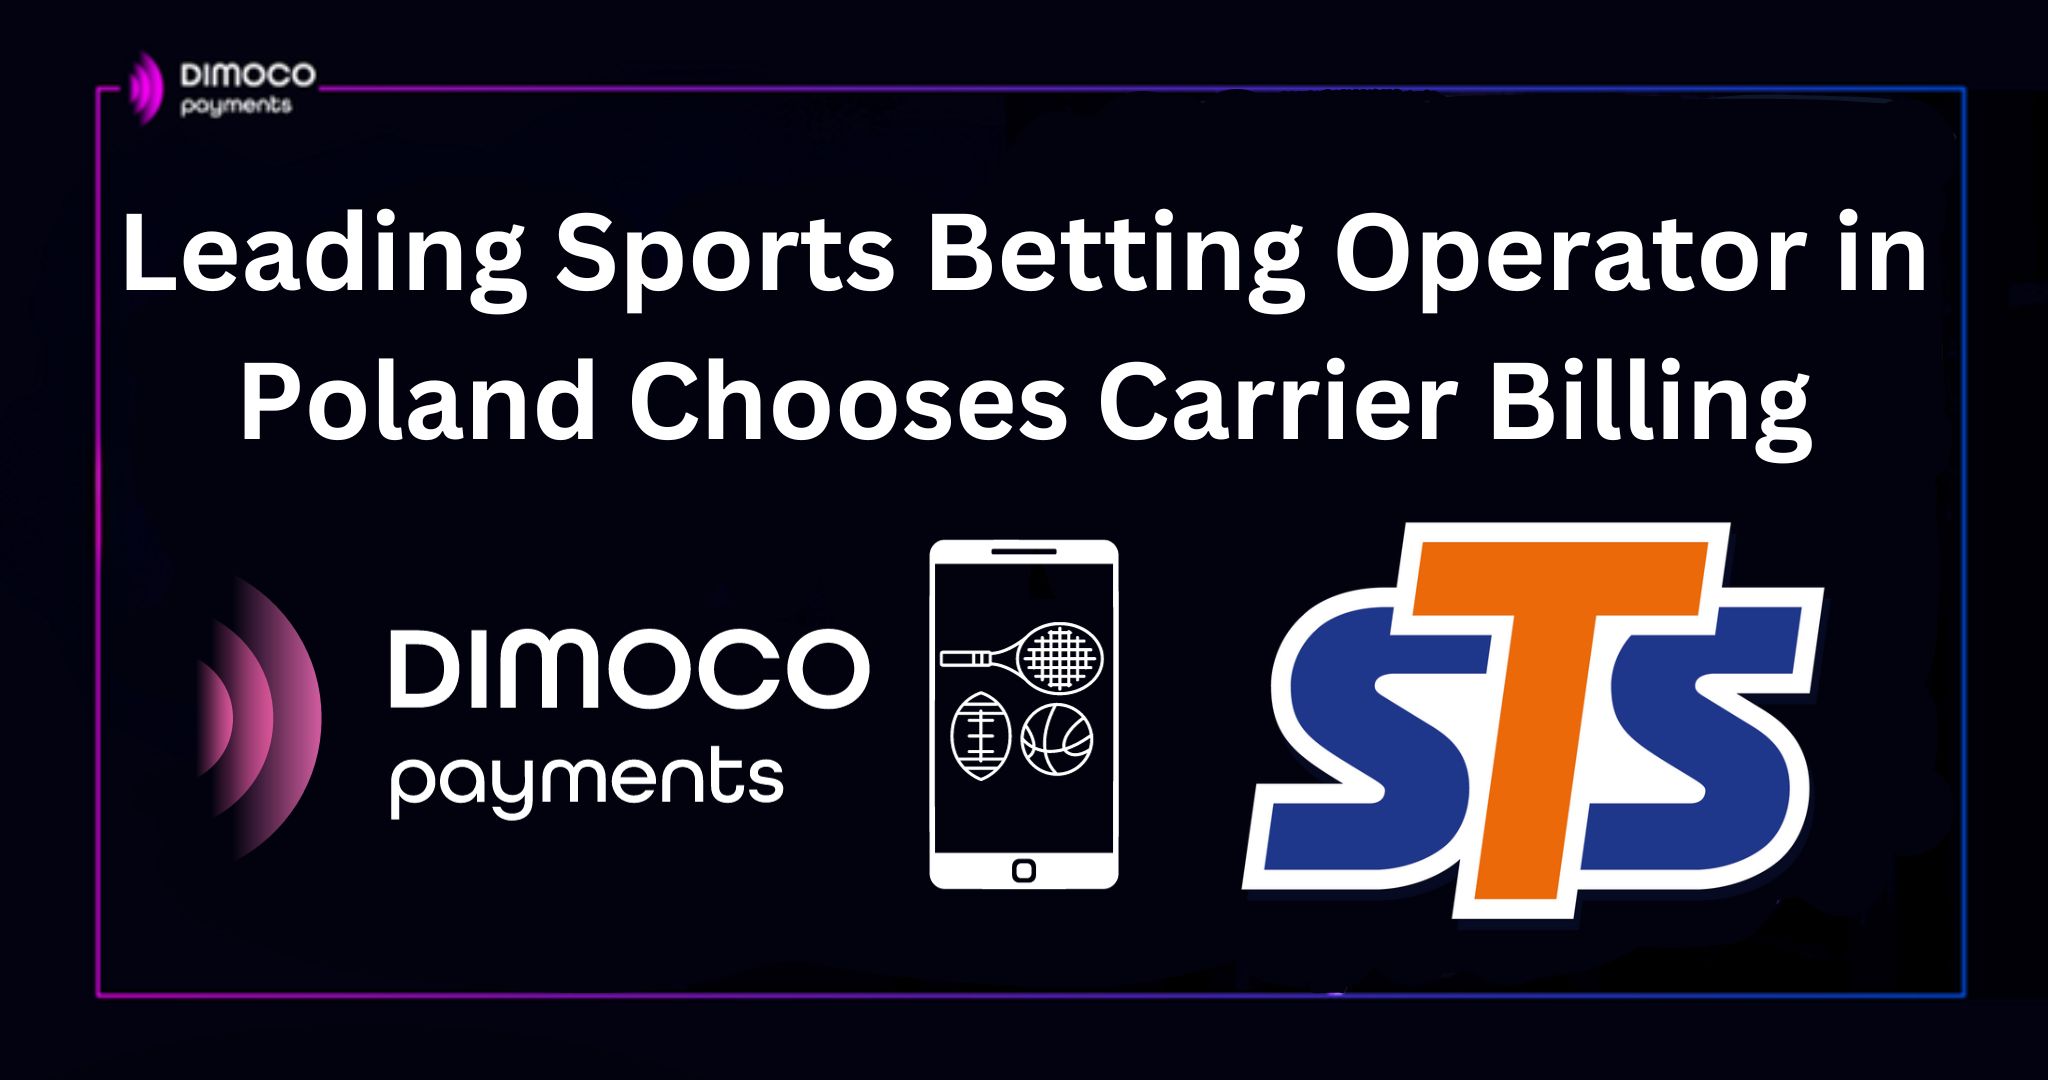 STS chooses DIMOCO Payments to provide Carrier Billing services to its customers